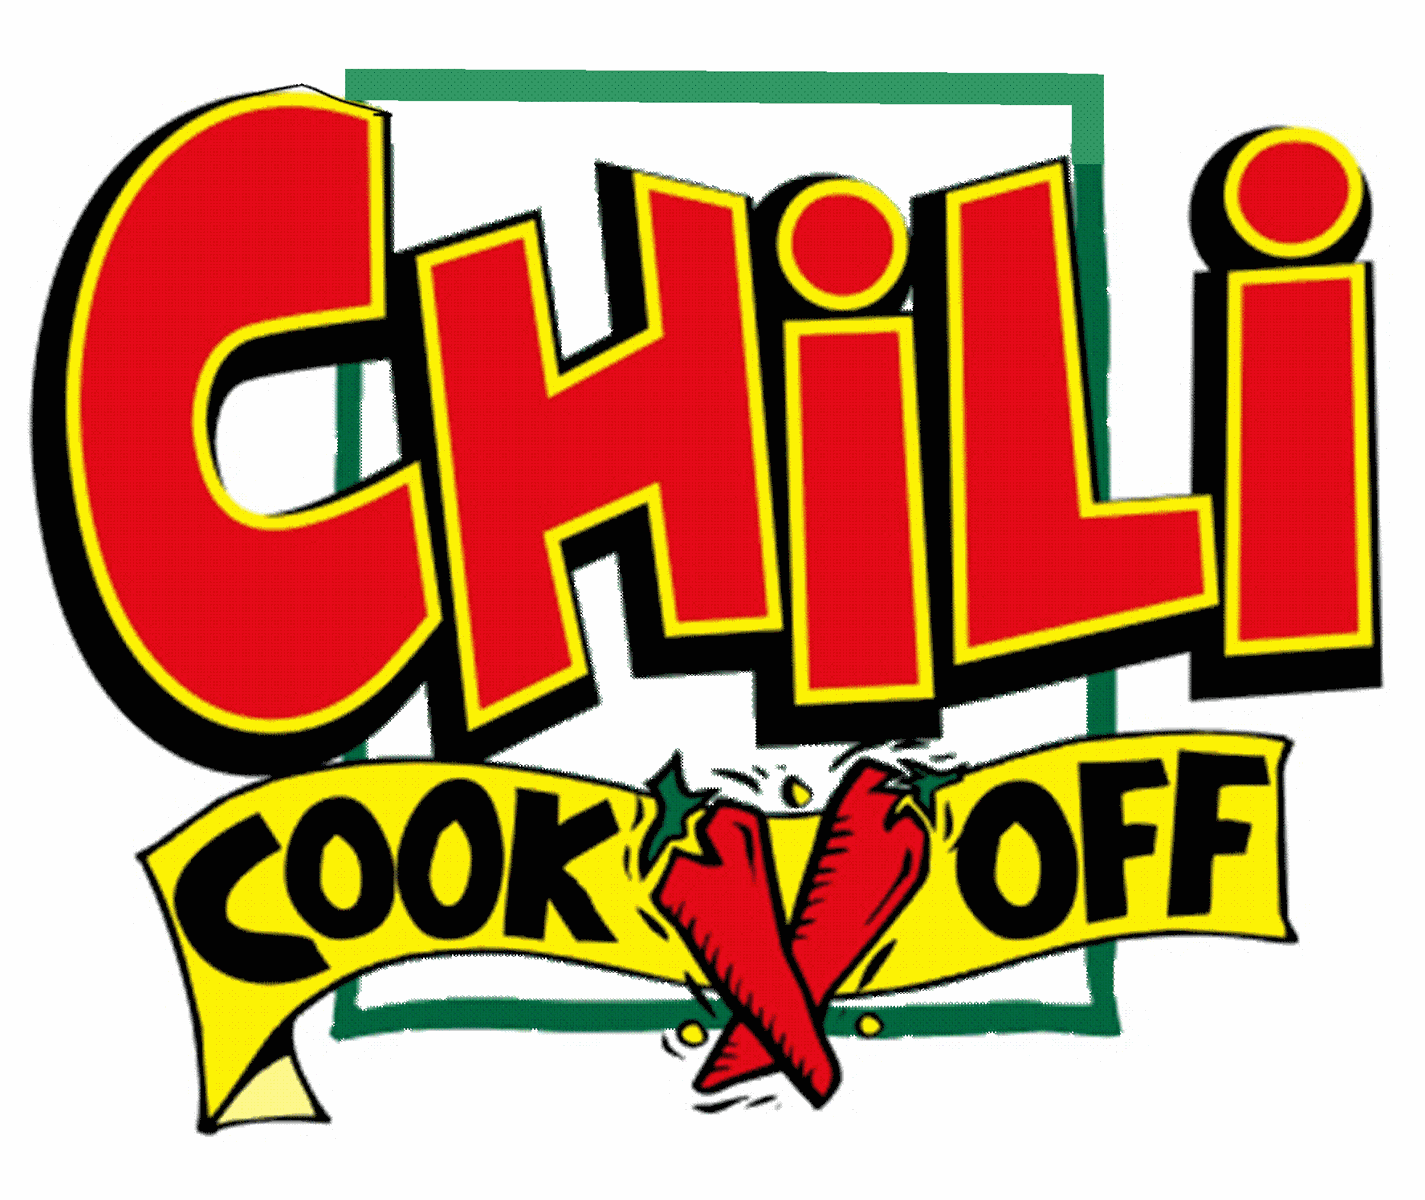 16 chili cookoff clip art. Free cliparts that you can download to you computer and use in your designs.